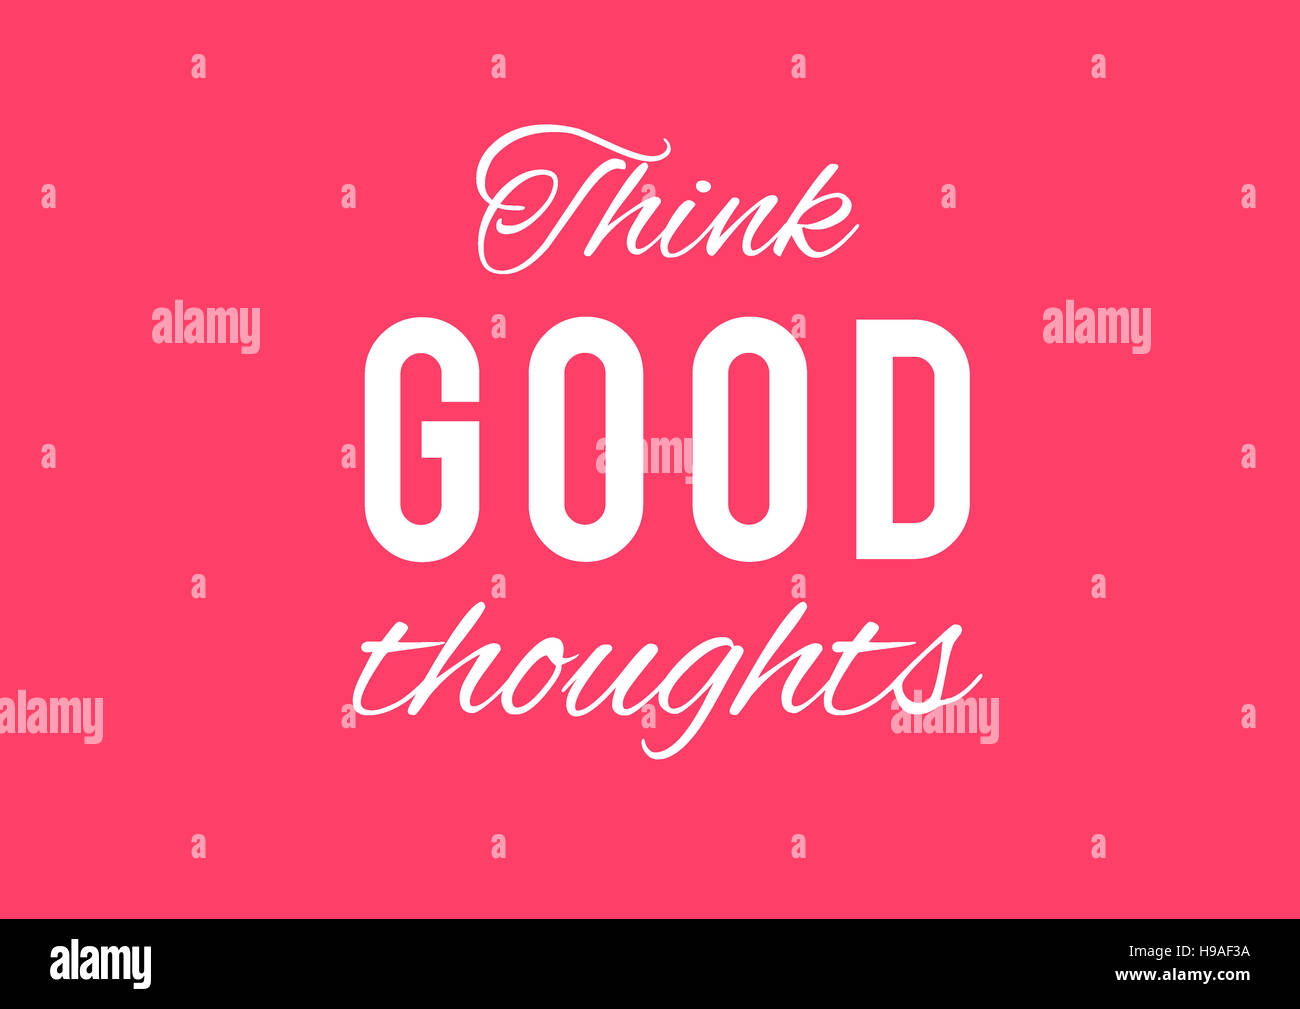 Think good thoughts, background, texture, illustration, red background,  white letters, motivation, poster, quotes Stock Photo - Alamy